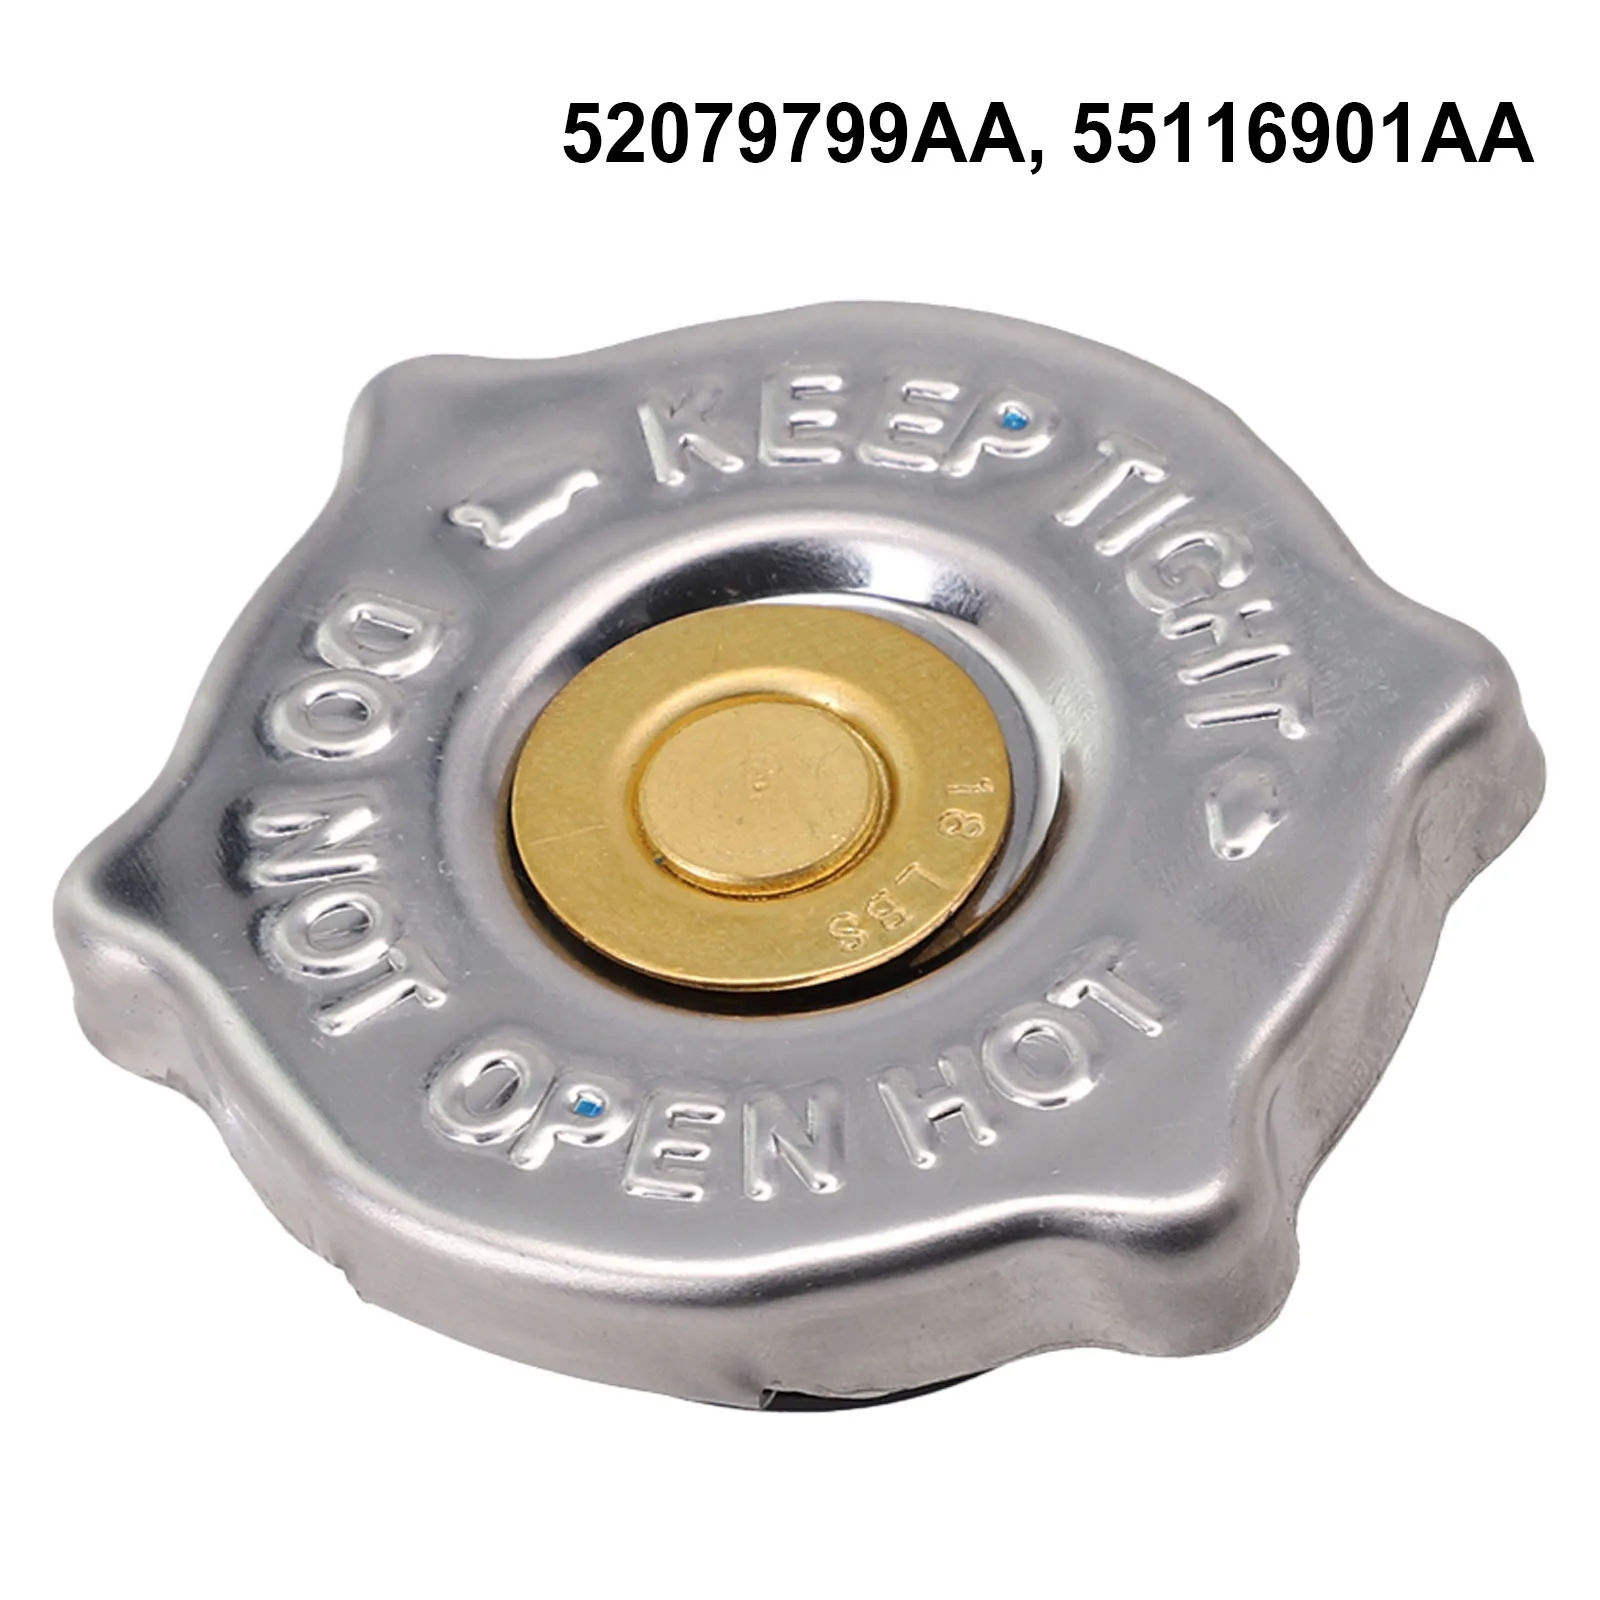 

1pc Metal Radiator Cap Replacement 18LBS 52079799AA For Jeep For Wrangler For Chrysler For Dodge 93-04 Accessories